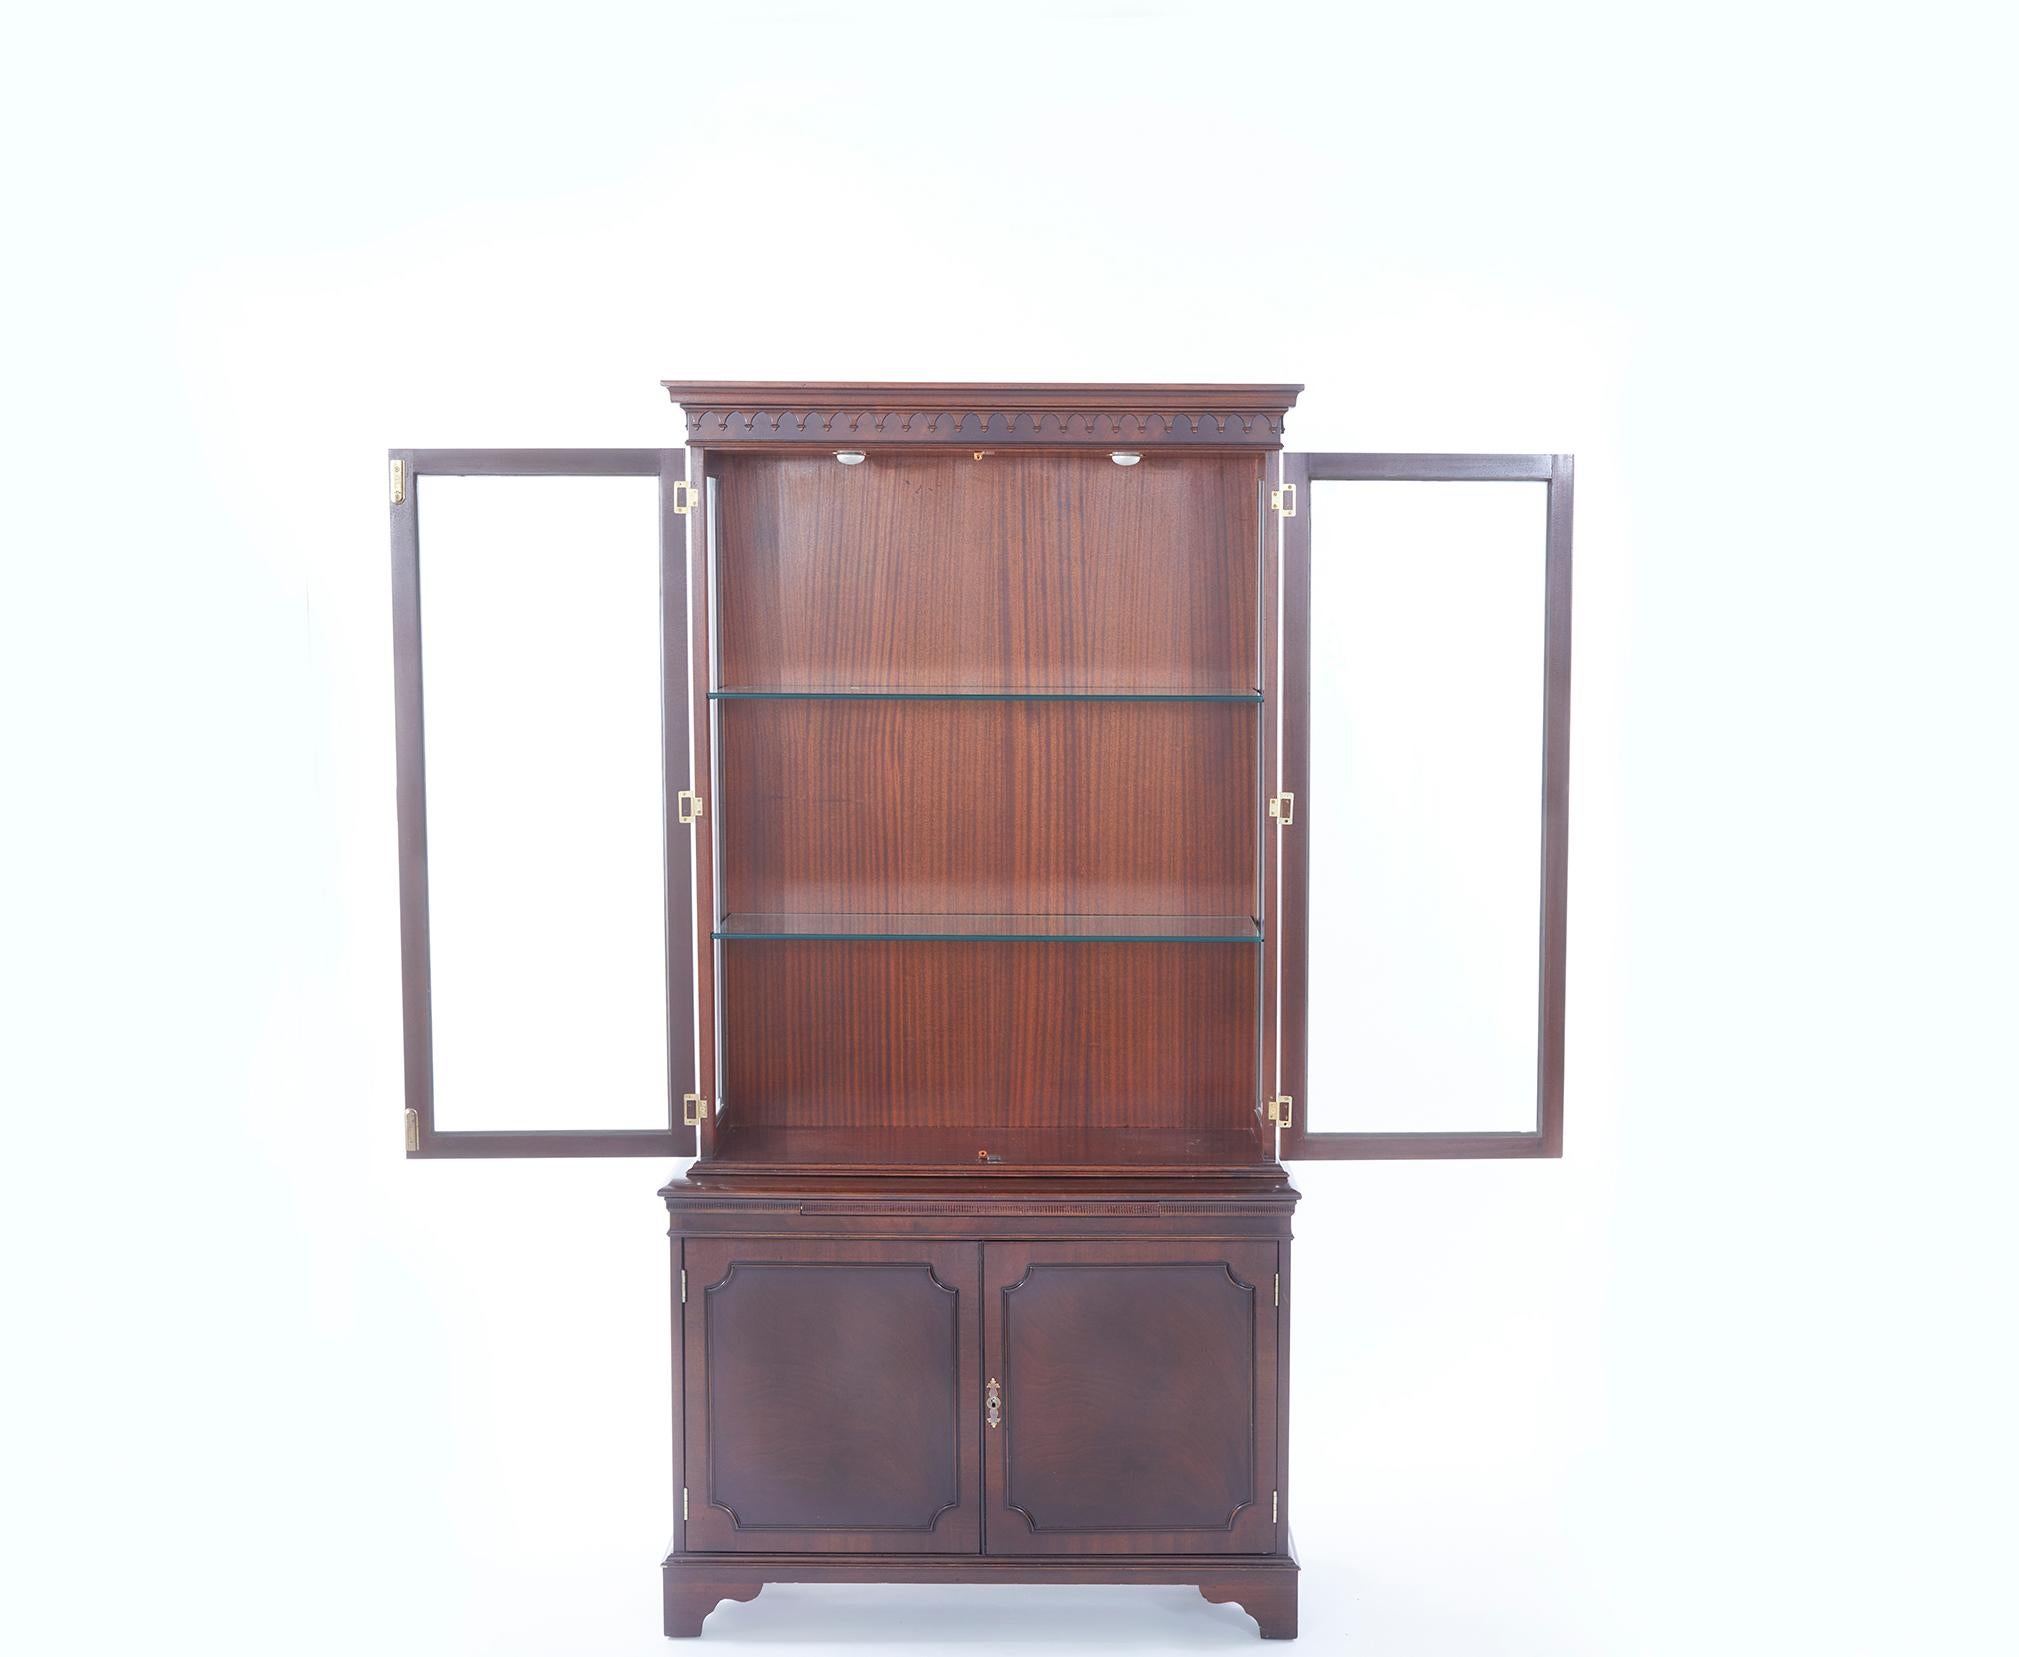 Great English craftsmanship two parts mahogany wood china cabinet / bookcase with interior glass shelves & exterior Greek key influence wood design detail. The hutch / bookcase is very sturdy & in good condition with minor wear consistent with age /